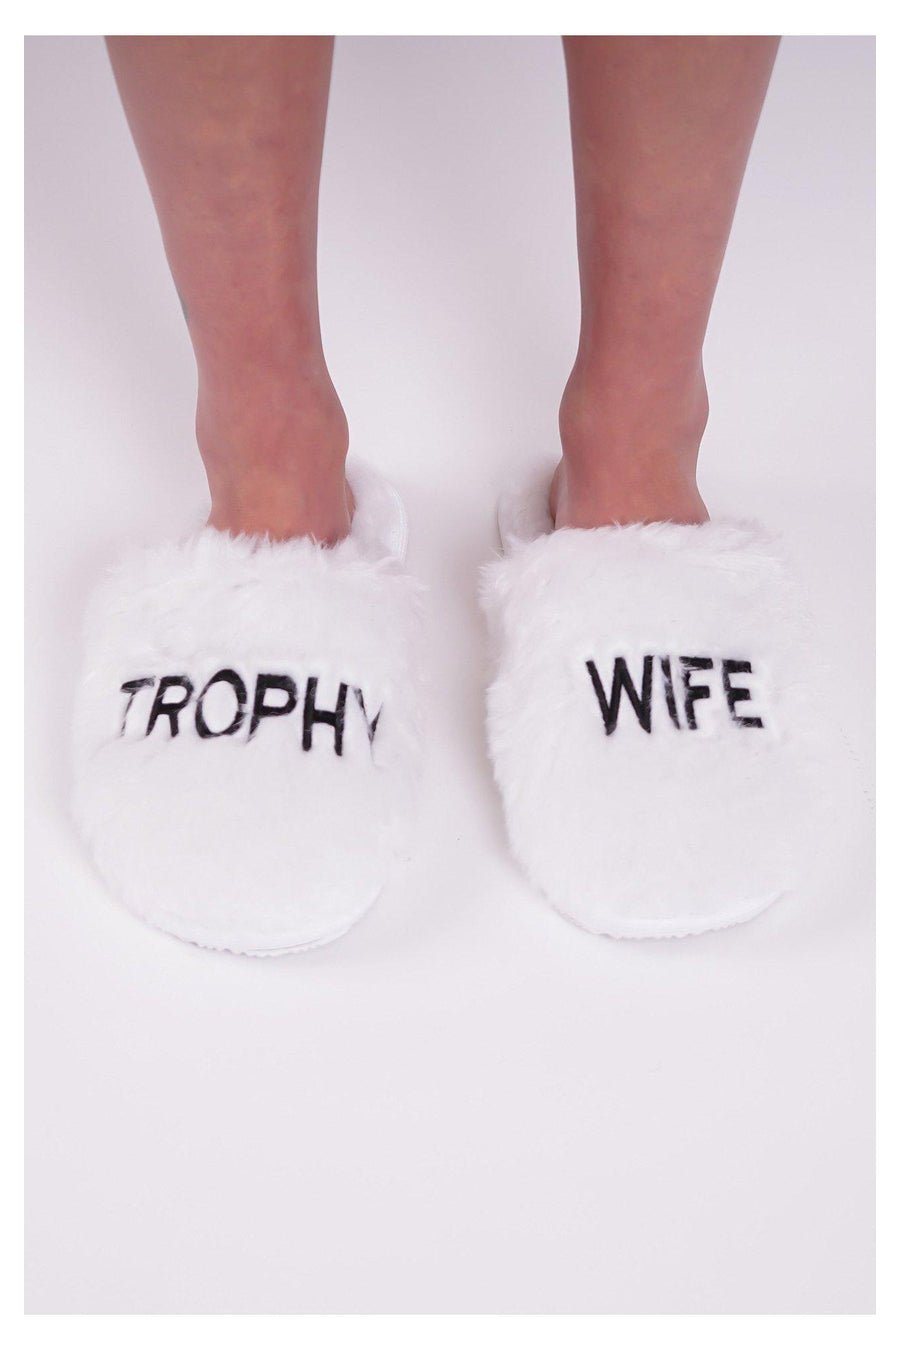 Shop LA Trading Co Bel Air Trophy Wife Slippers - Premium Slippers from LA Trading Company Online now at Spoiled Brat 